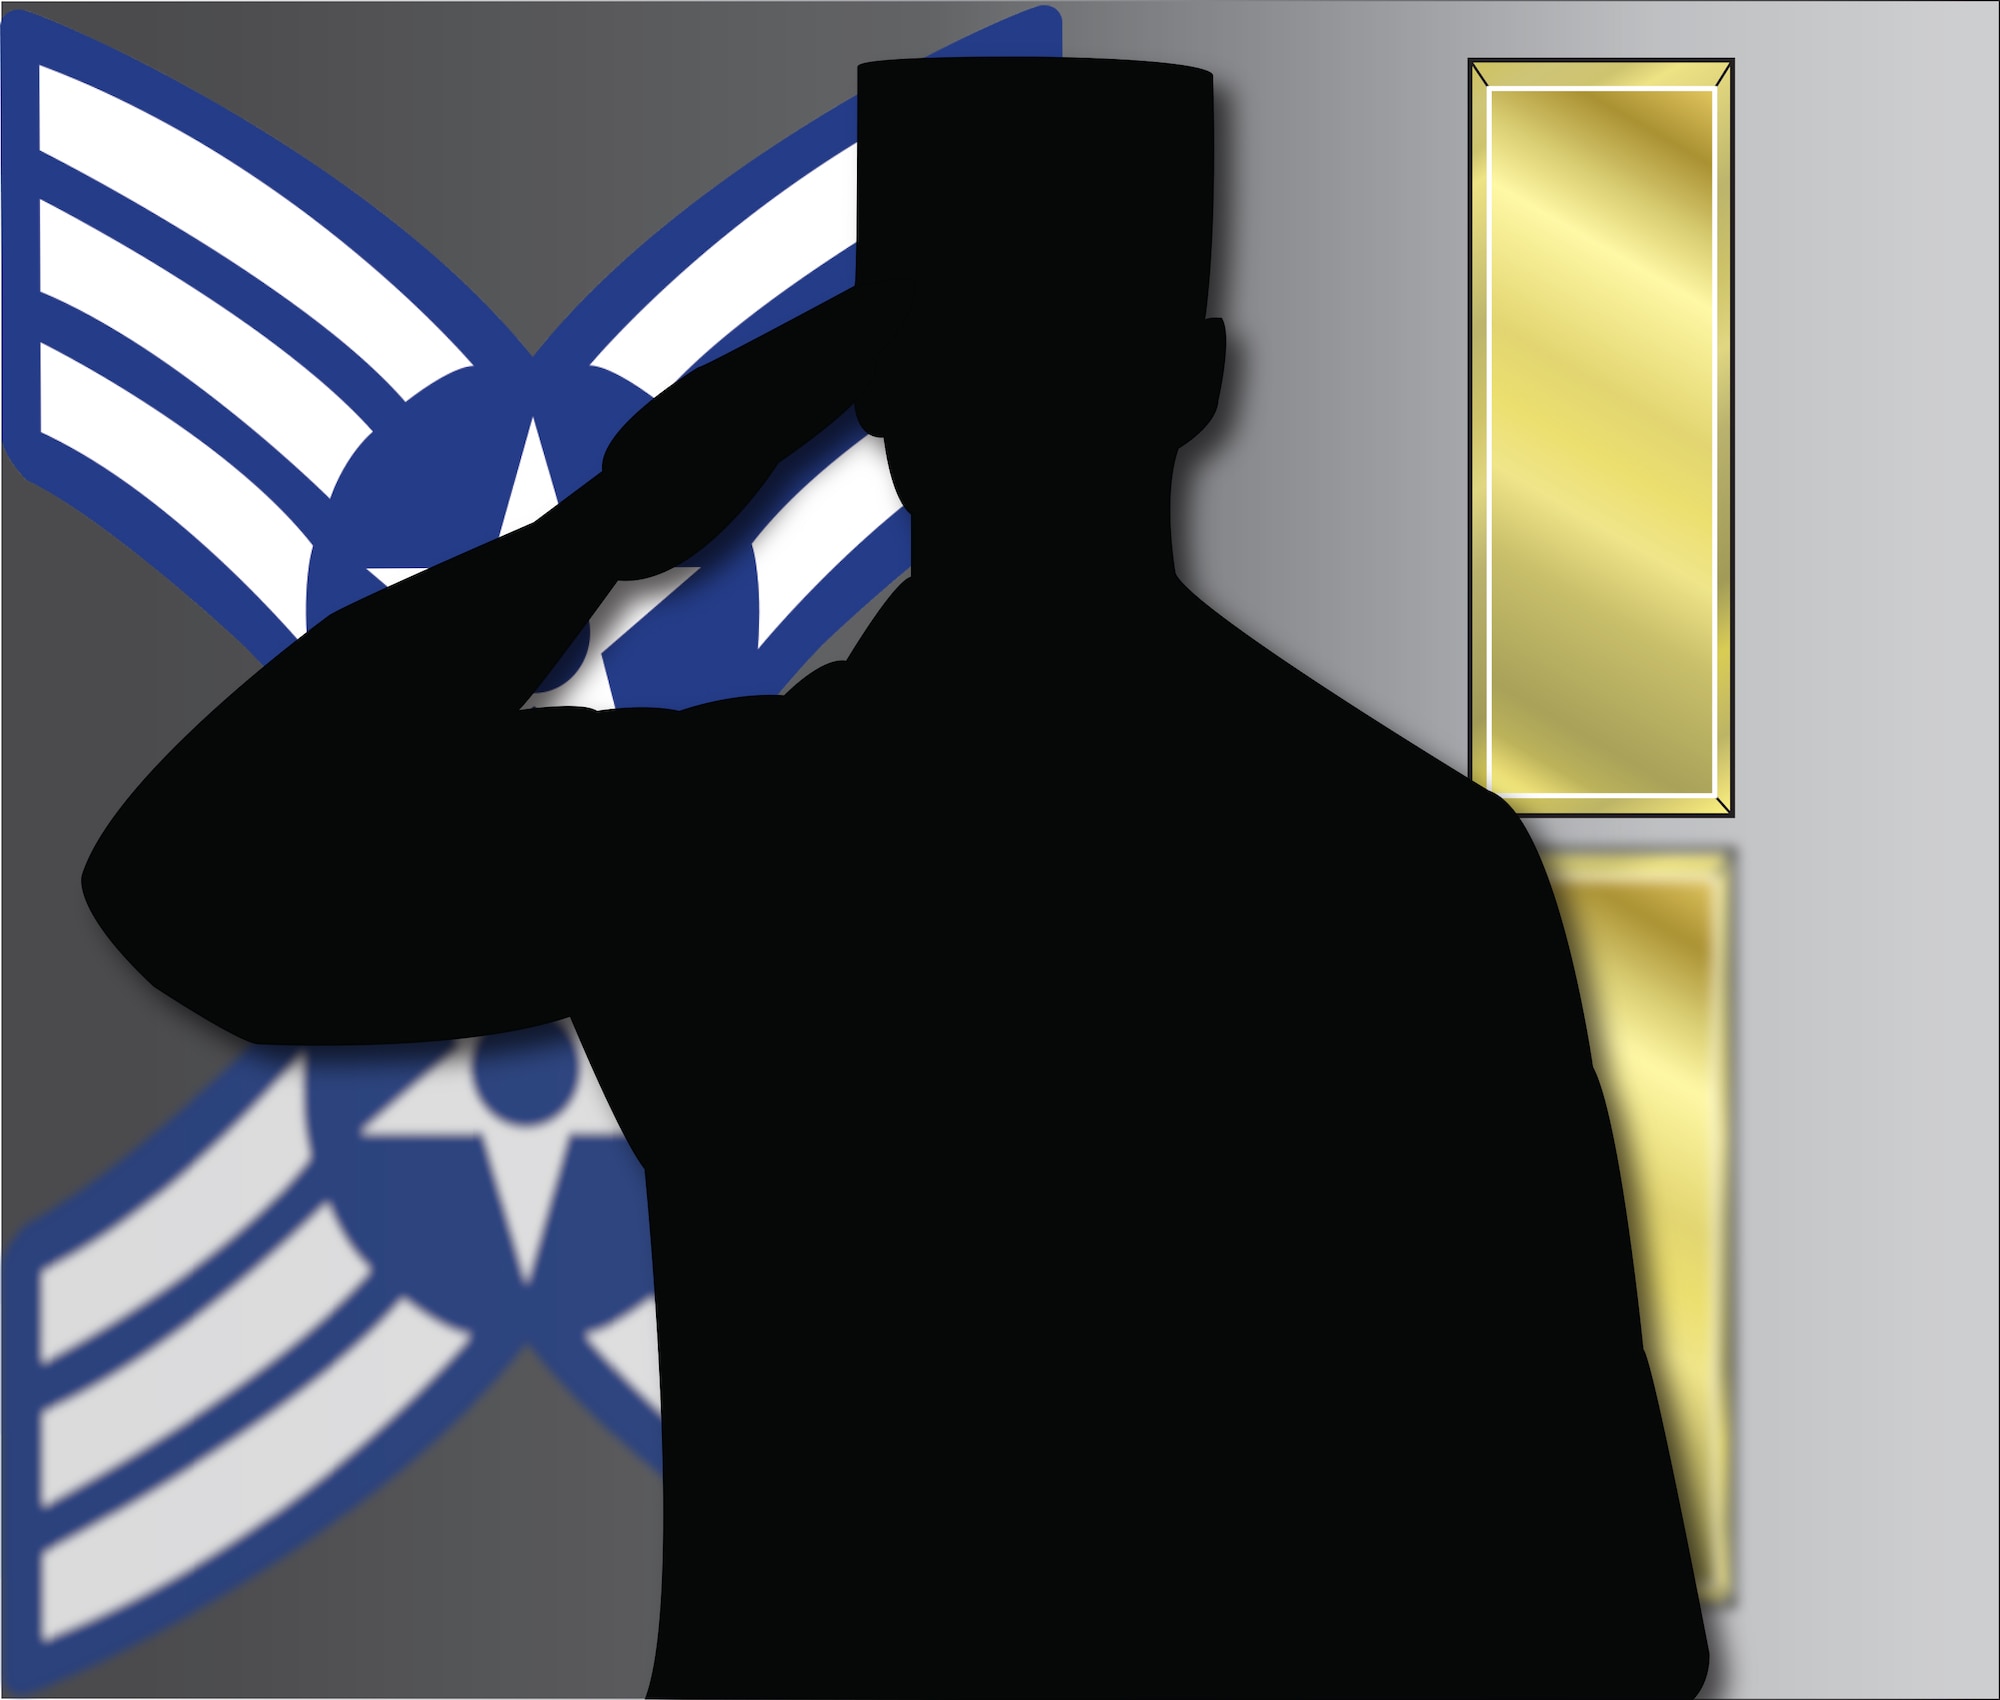 The Air Force offers multiple avenues for enlisted Airmen to commission throughout their career. Most paths commission Airmen as second lieutenants, however, some of the professional programs earn Airmen a higher rank upon completion of the course.  (U.S. Air Force graphic by Airman 1st Class Nicolas Z. Erwin)